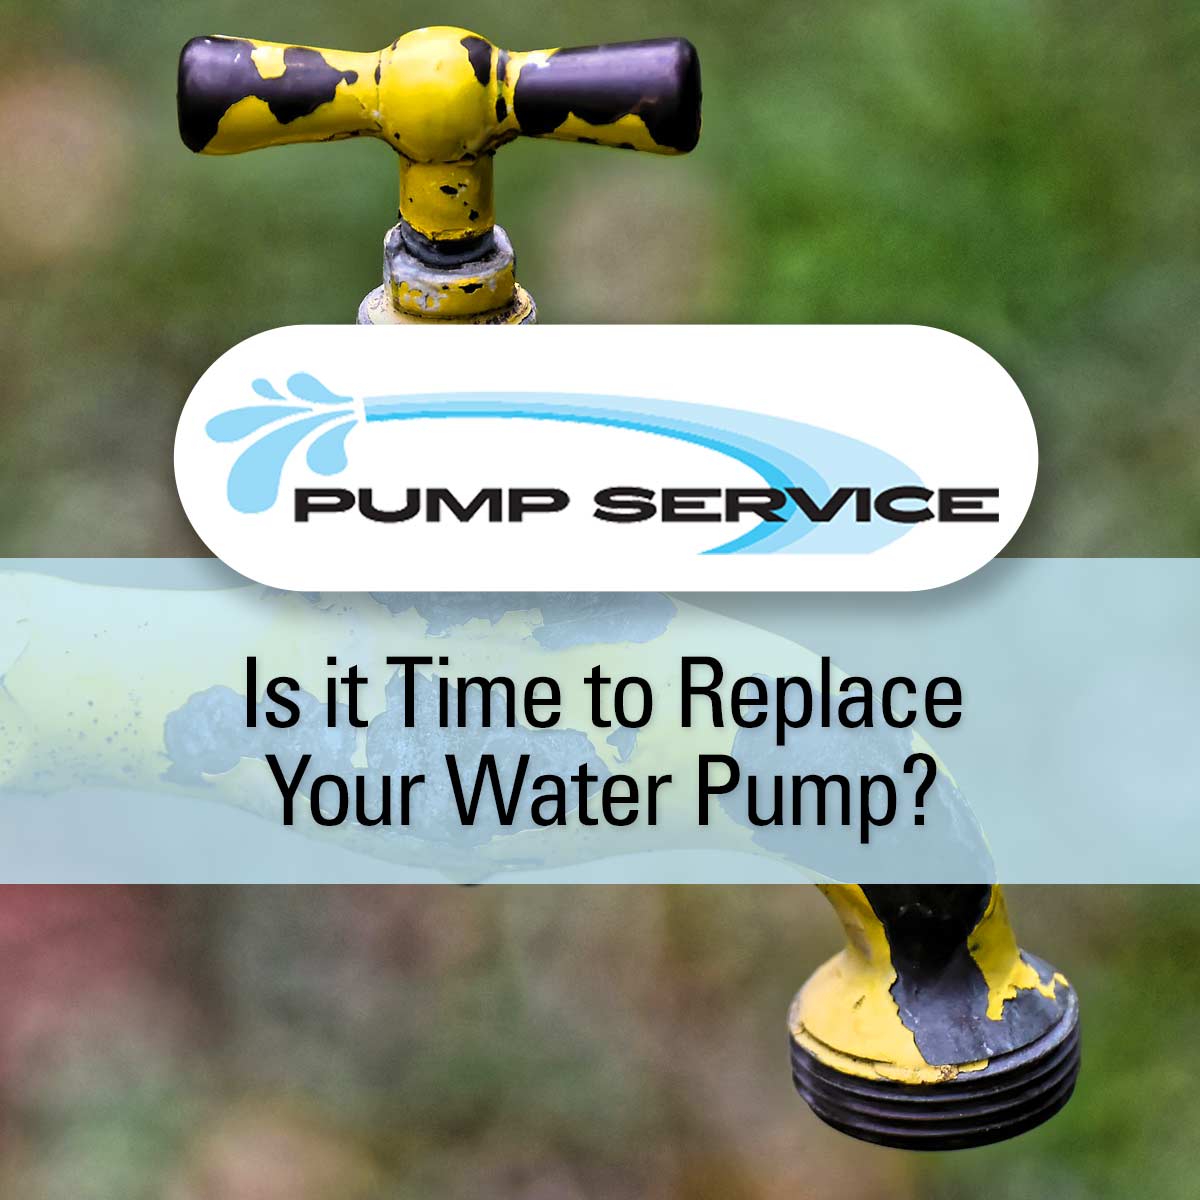 Is it Time to Replace Your Water Pump?